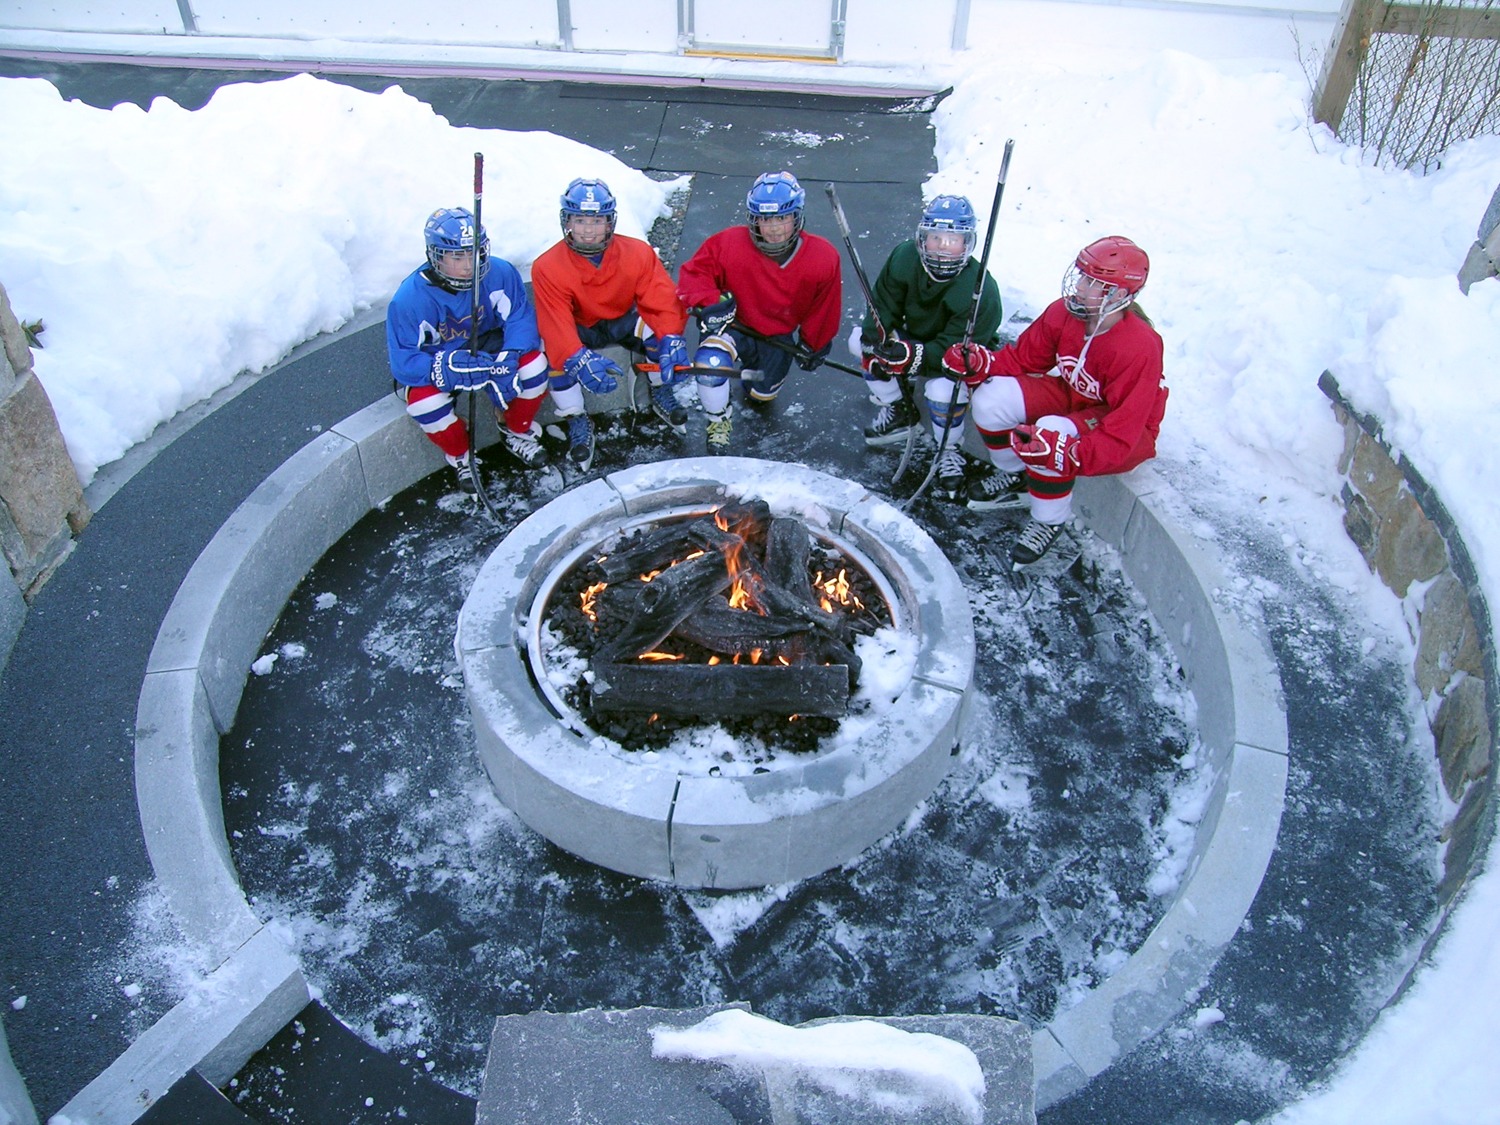 Five people in hockey gear sit around an outdoor fire pit surrounded by snow, resting their hockey sticks on the ground, in a wintry setting.